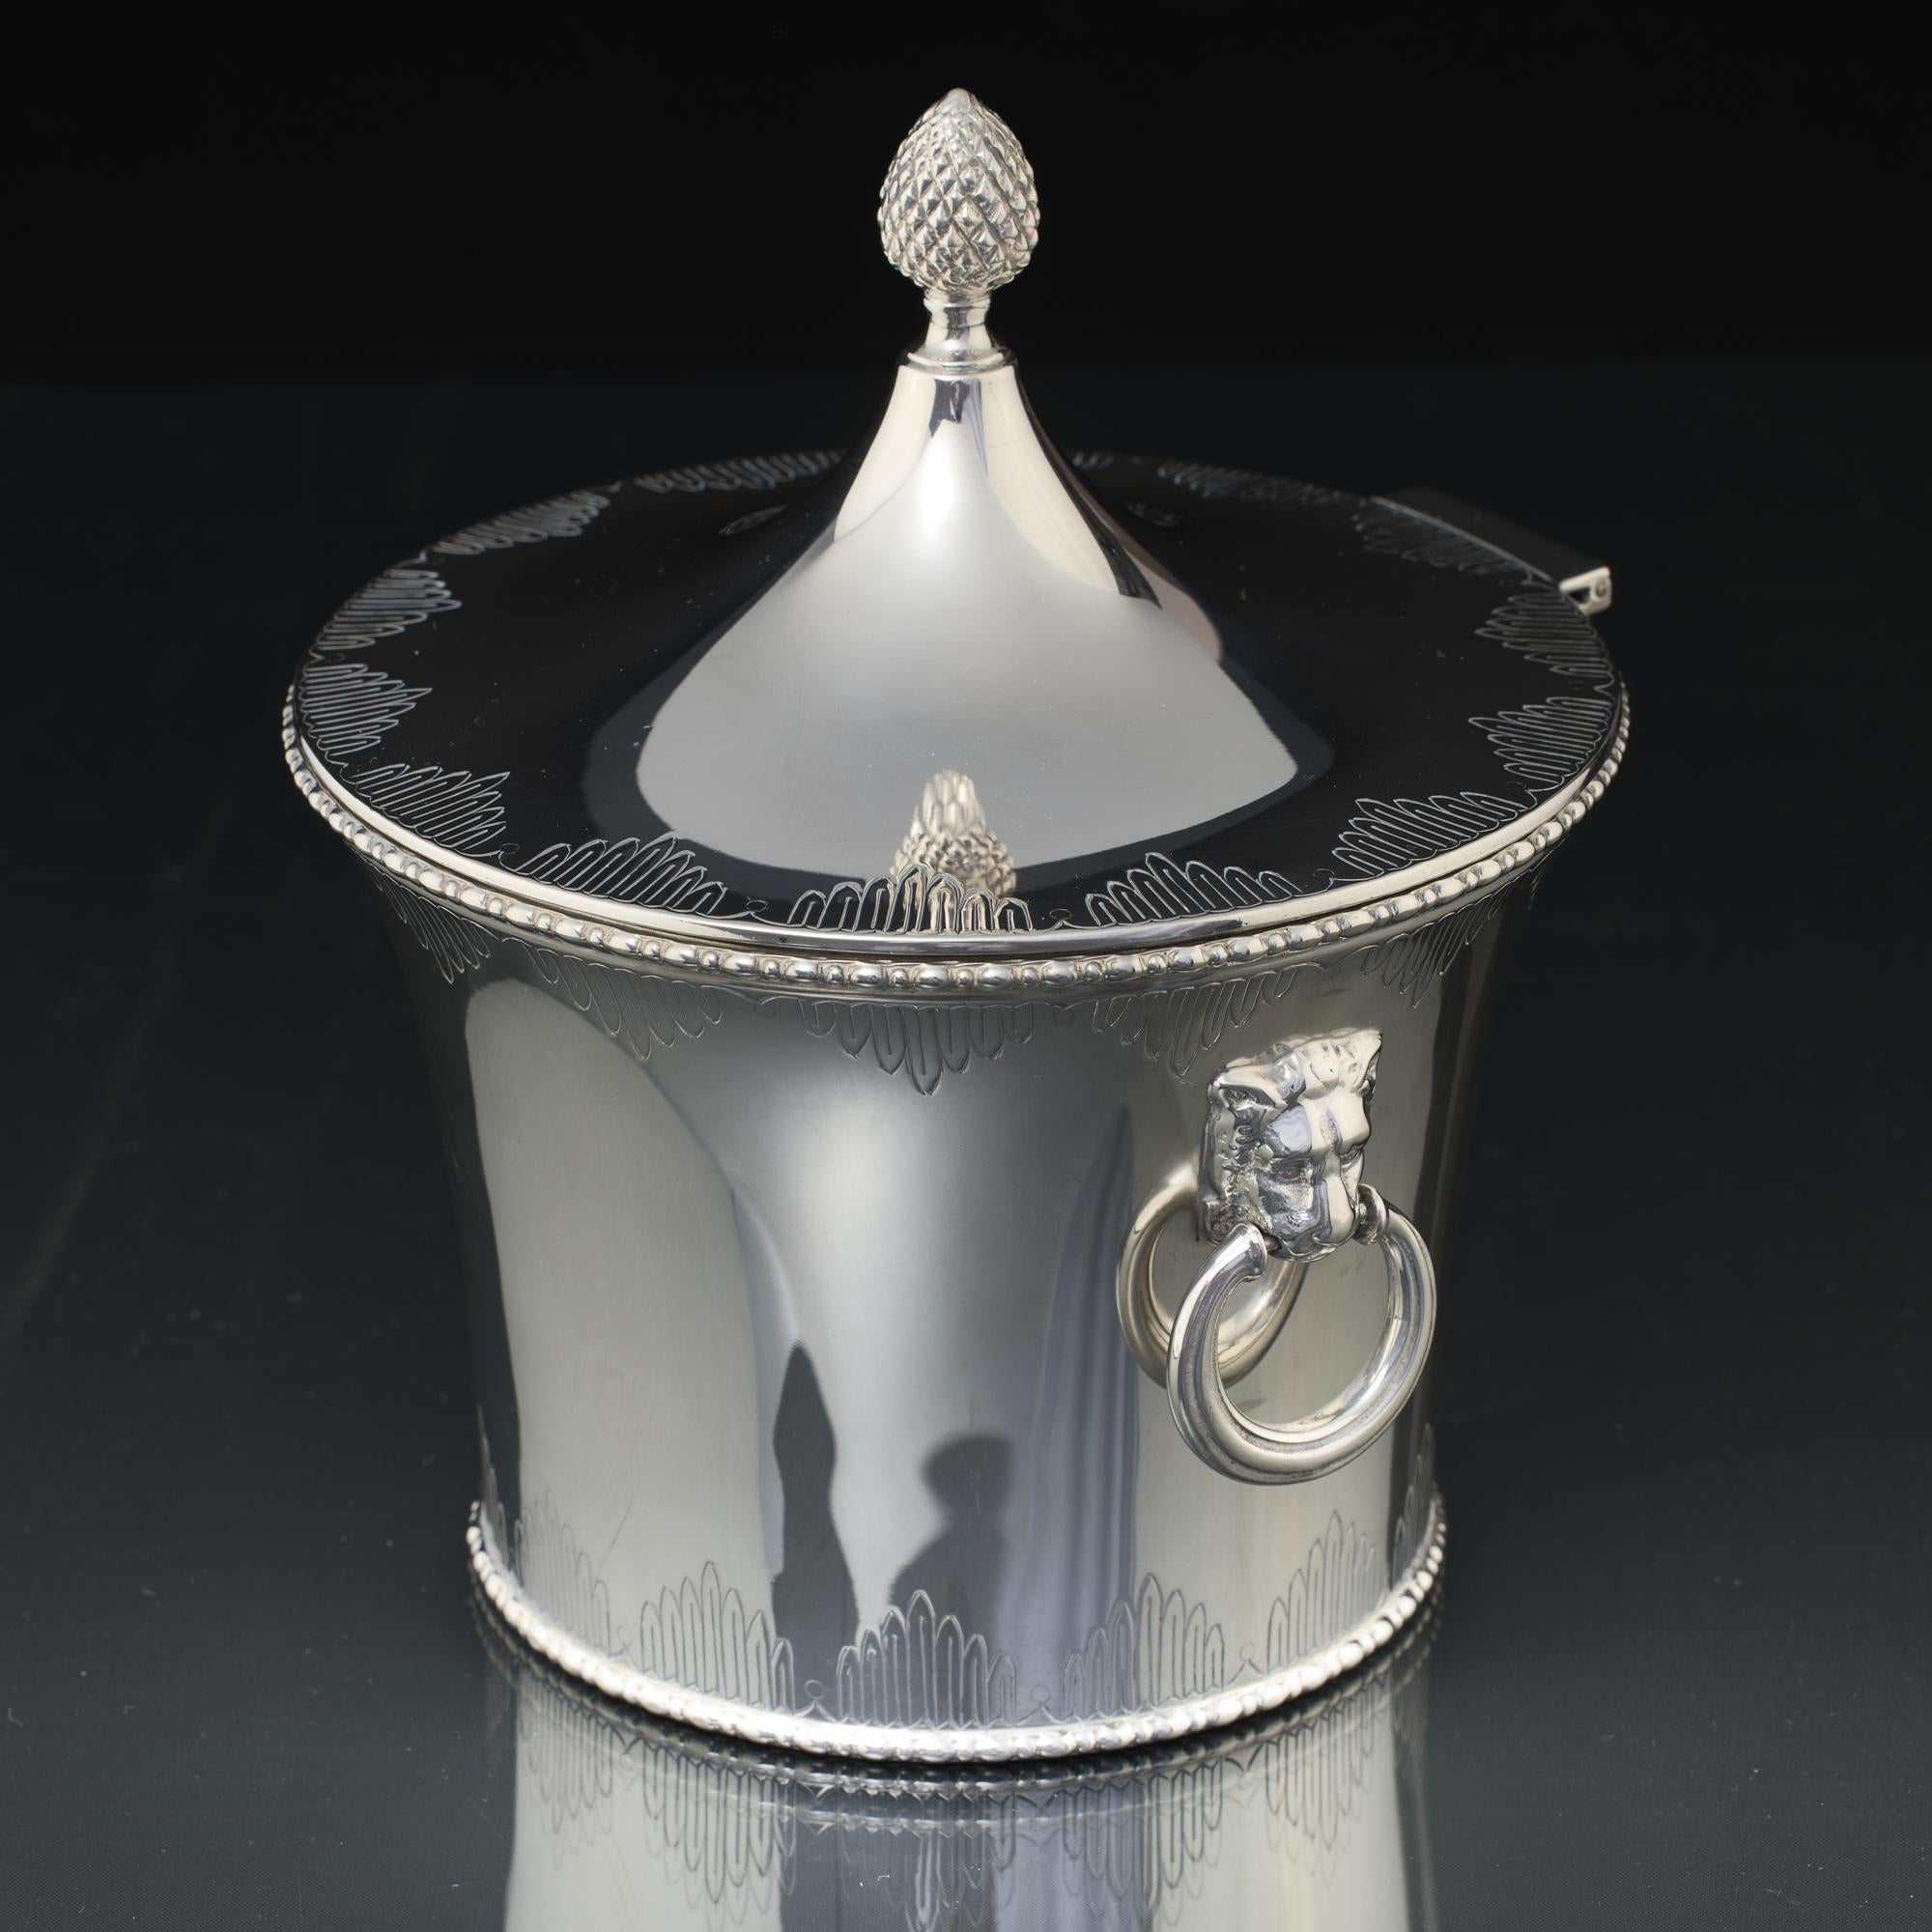 Silver biscuit box of tapering cylindrical form, fitted with a hinged conical cover, hand chased around the edge with panels of graduated, stepped fluting, and surmounted by a pineapple-shaped finial; a symbol of hospitality. The silver body is